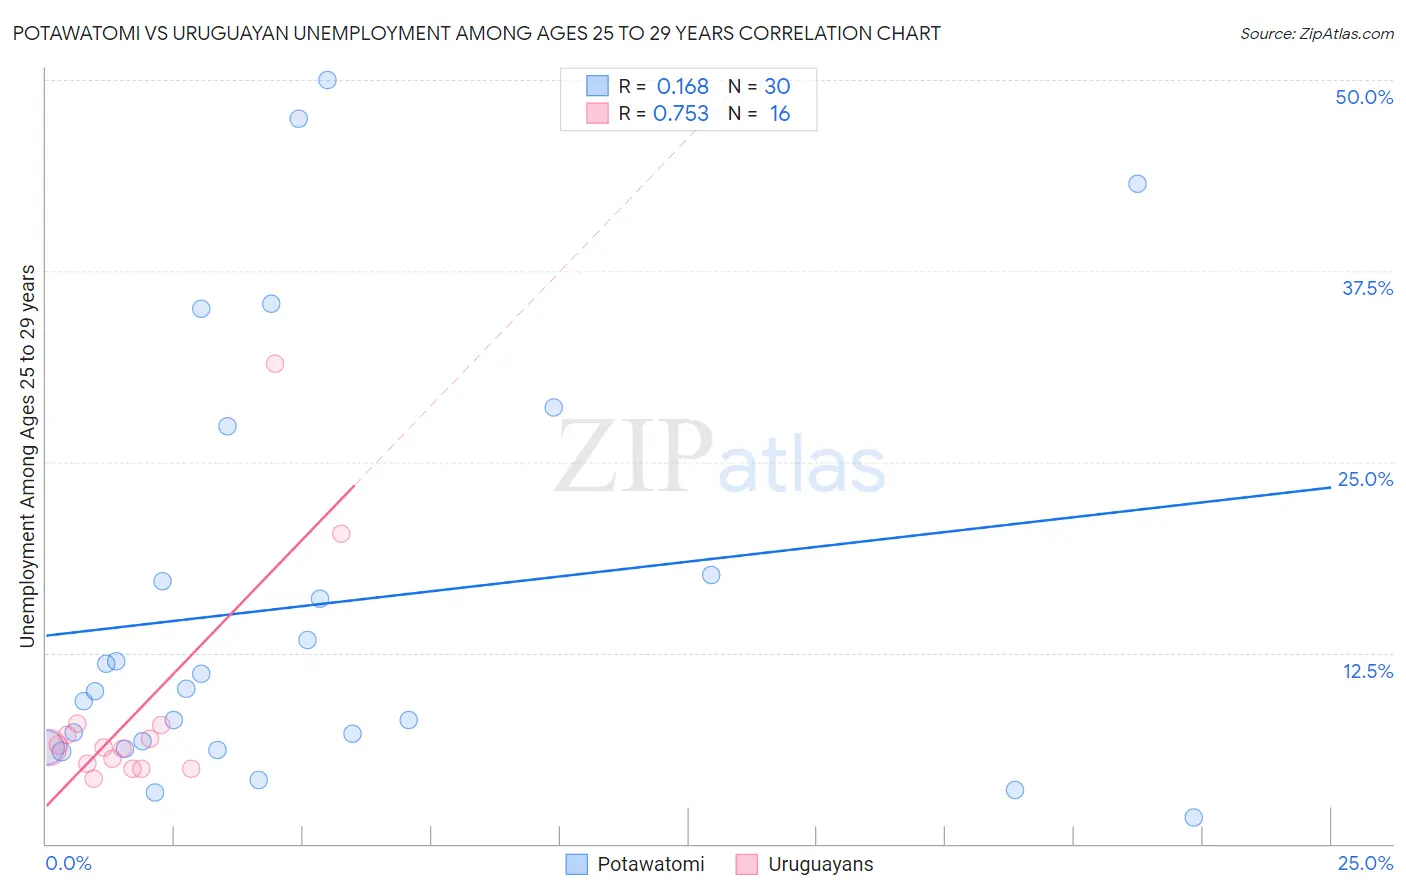 Potawatomi vs Uruguayan Unemployment Among Ages 25 to 29 years